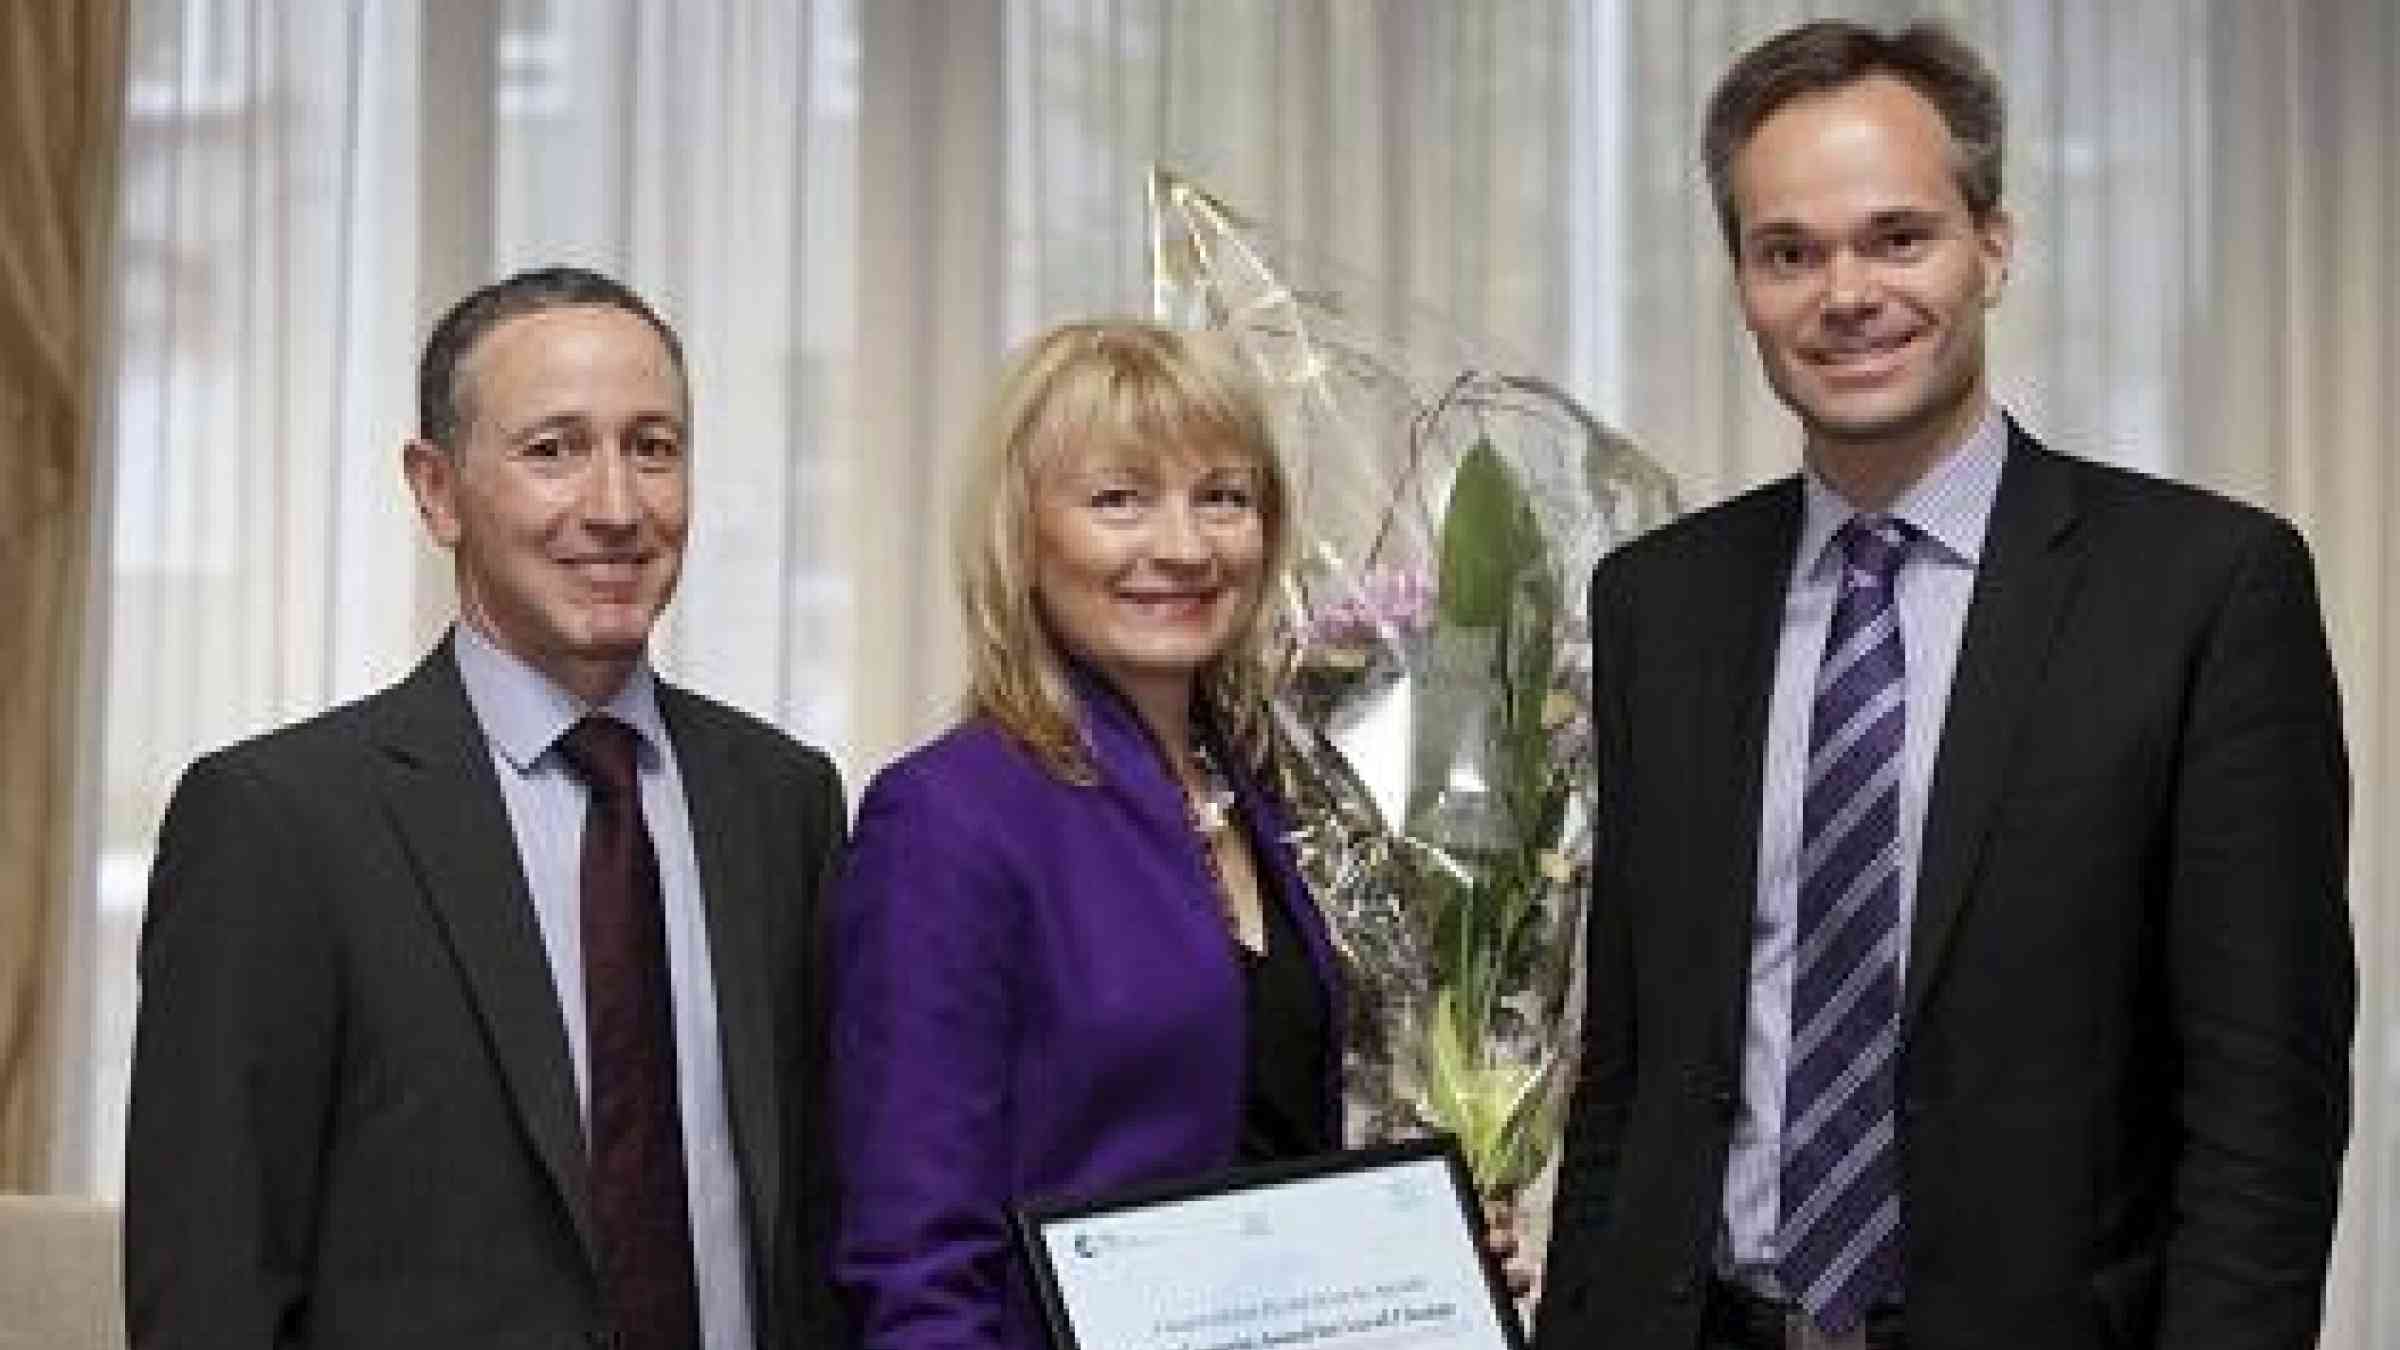 Ms. Päivi Sillanaukee (centre), Permanent Secretary at Finland’s Ministry of Social Affairs and Health, receives the Damir Čemerin Award on behalf of the Finnish Global Health Security Agenda team, from Mr. Robert Glasser (left), the UN Special Representative of the Secretary-General for Disaster Risk Reduction, and  Mr. Kai Mykkänen (right), Finland’s Minister for Foreign Trade and Development  (Photo: Pasi Autio)